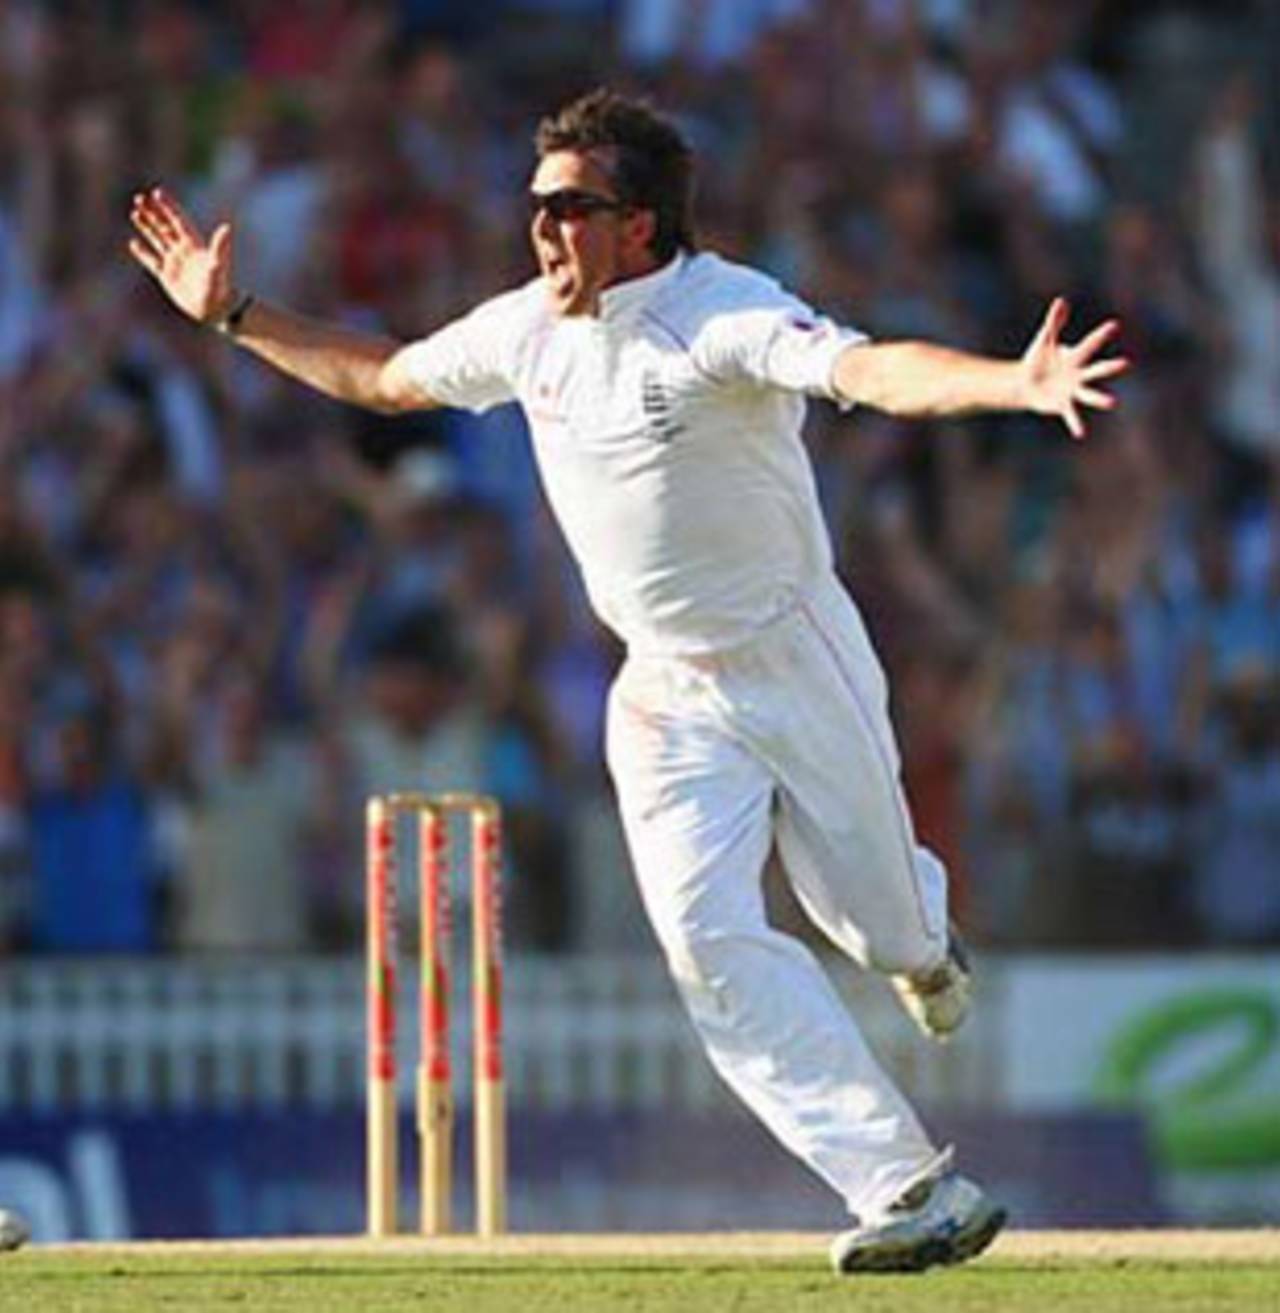 Graeme Swann claimed the final wicket as England regained the Ashes, England v Australia, 5th Test, The Oval, 4th day, August 23, 2009